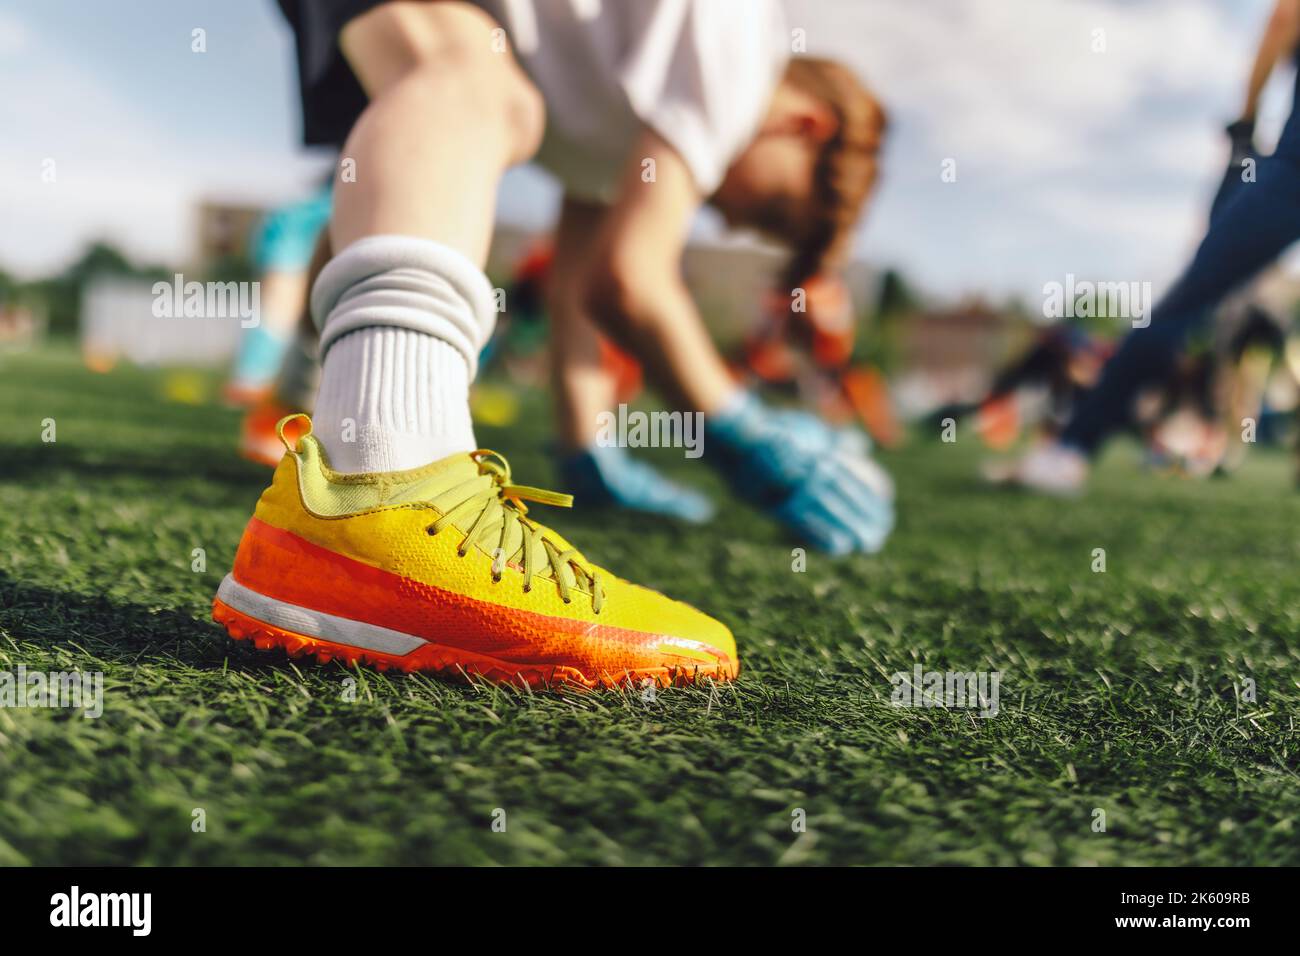 Young Boys at Football Goalkeepers Training Session. Kids Practicing Soccer Goalie Skills With Coach. Junior Level Soccer Goalie Stretching at Grass P Stock Photo